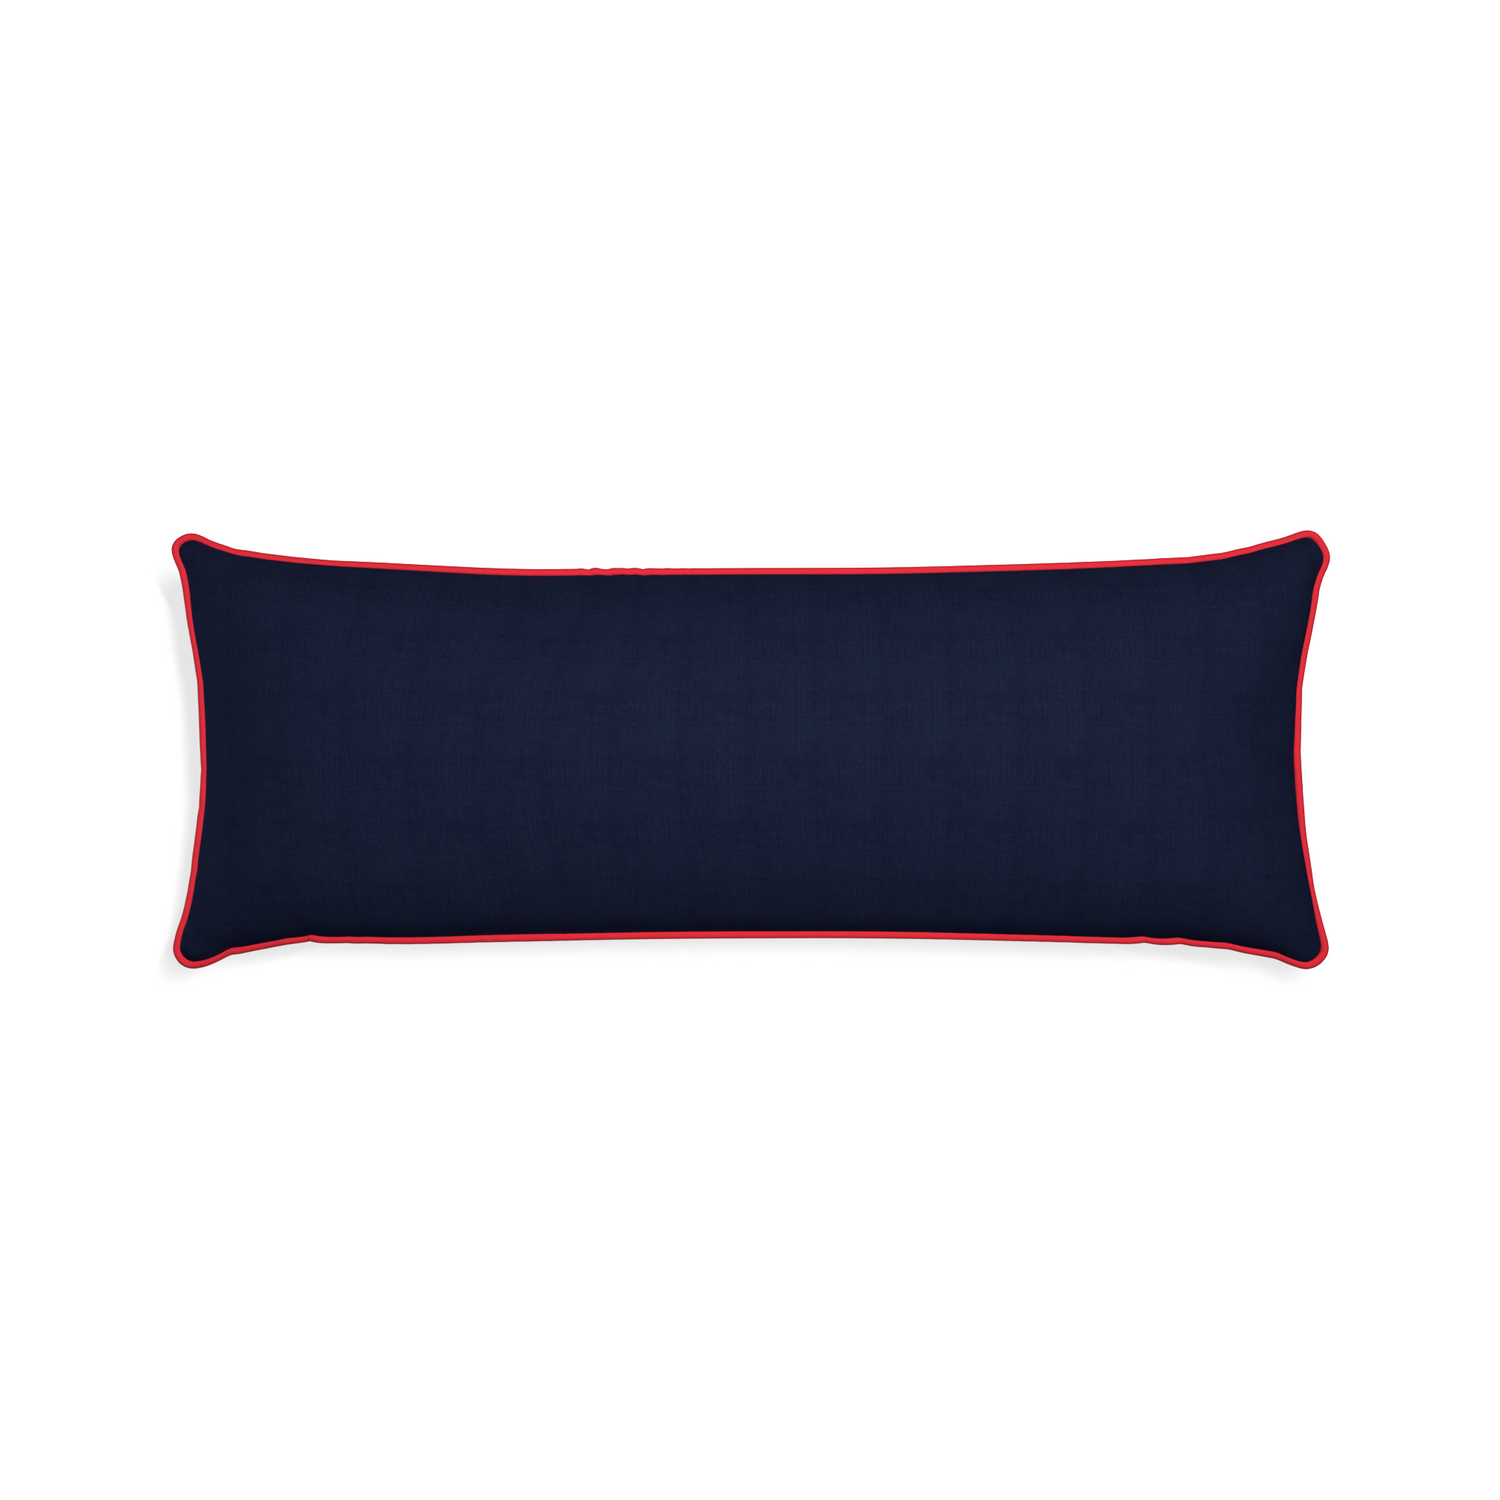 Xl-lumbar midnight custom pillow with cherry piping on white background